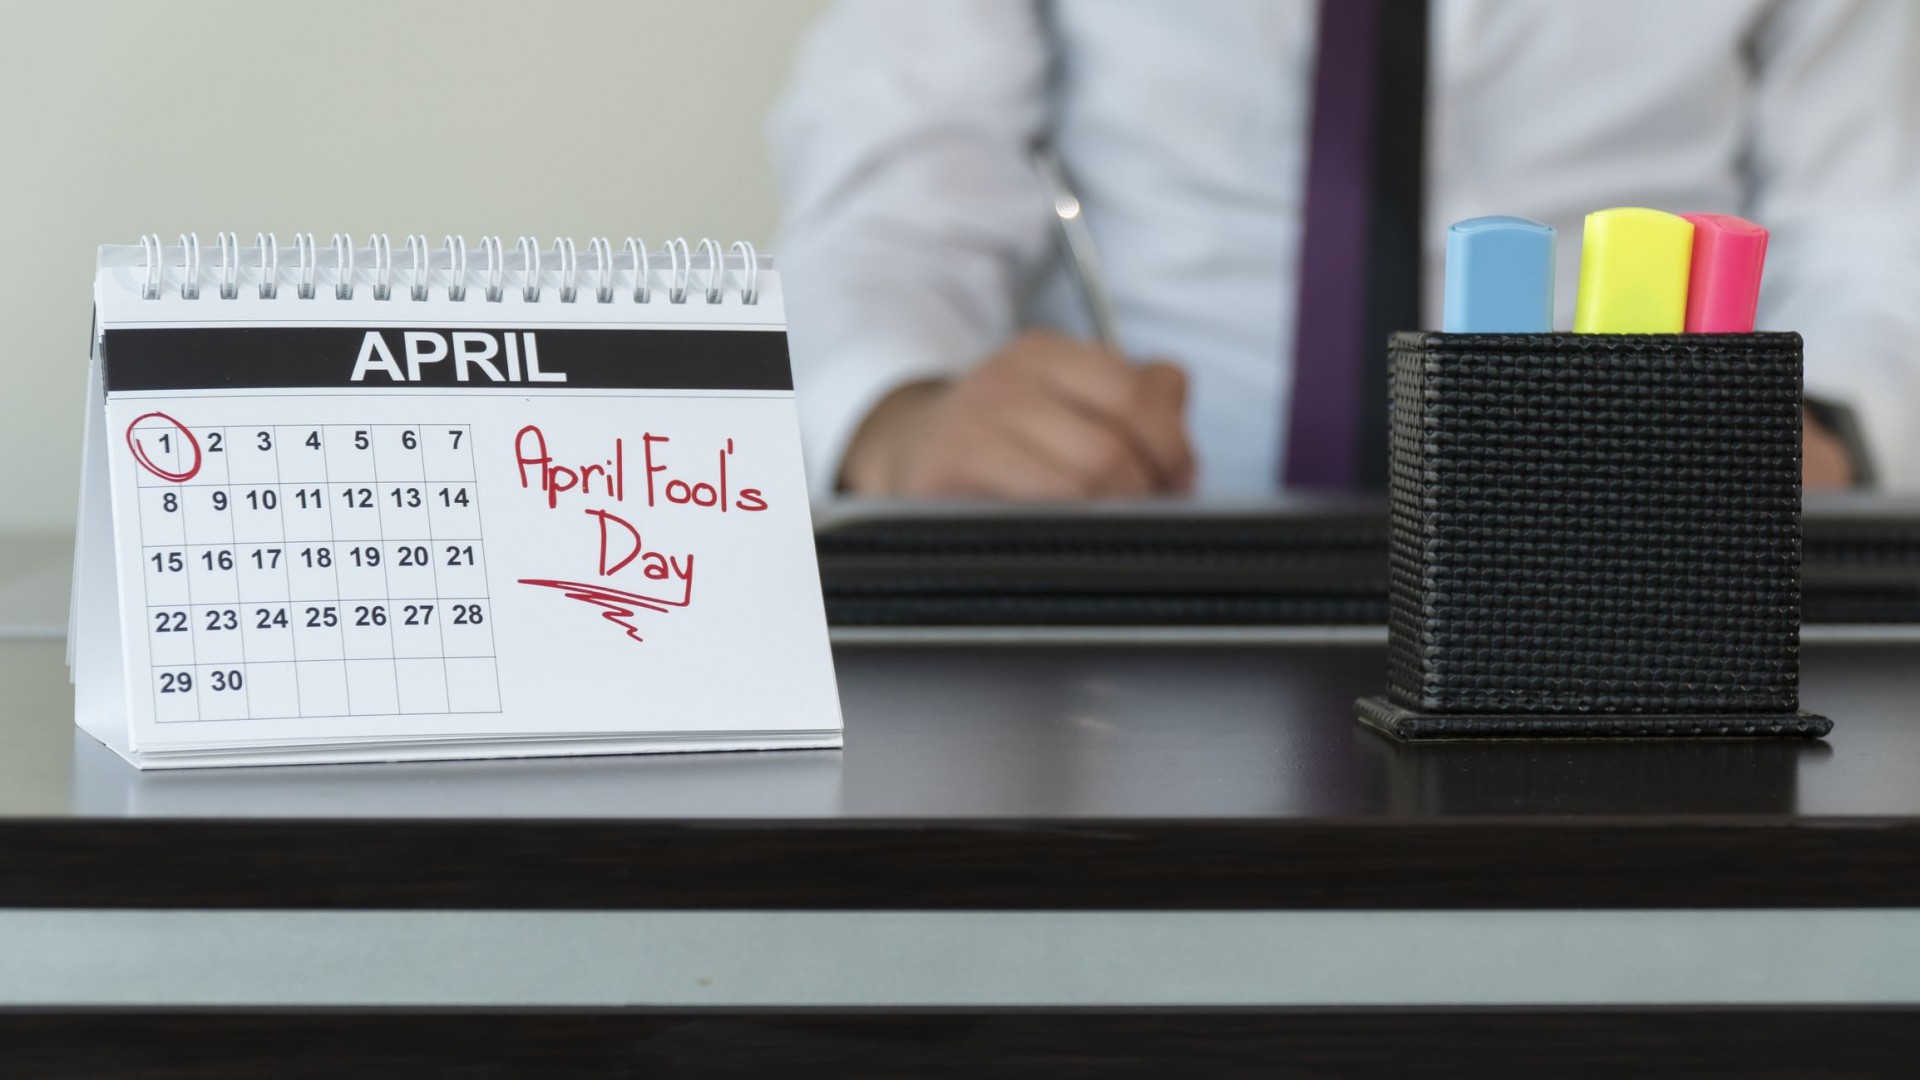 April Fools’ Day: Top 30 Best Pranks For Your Boss and Colleagues